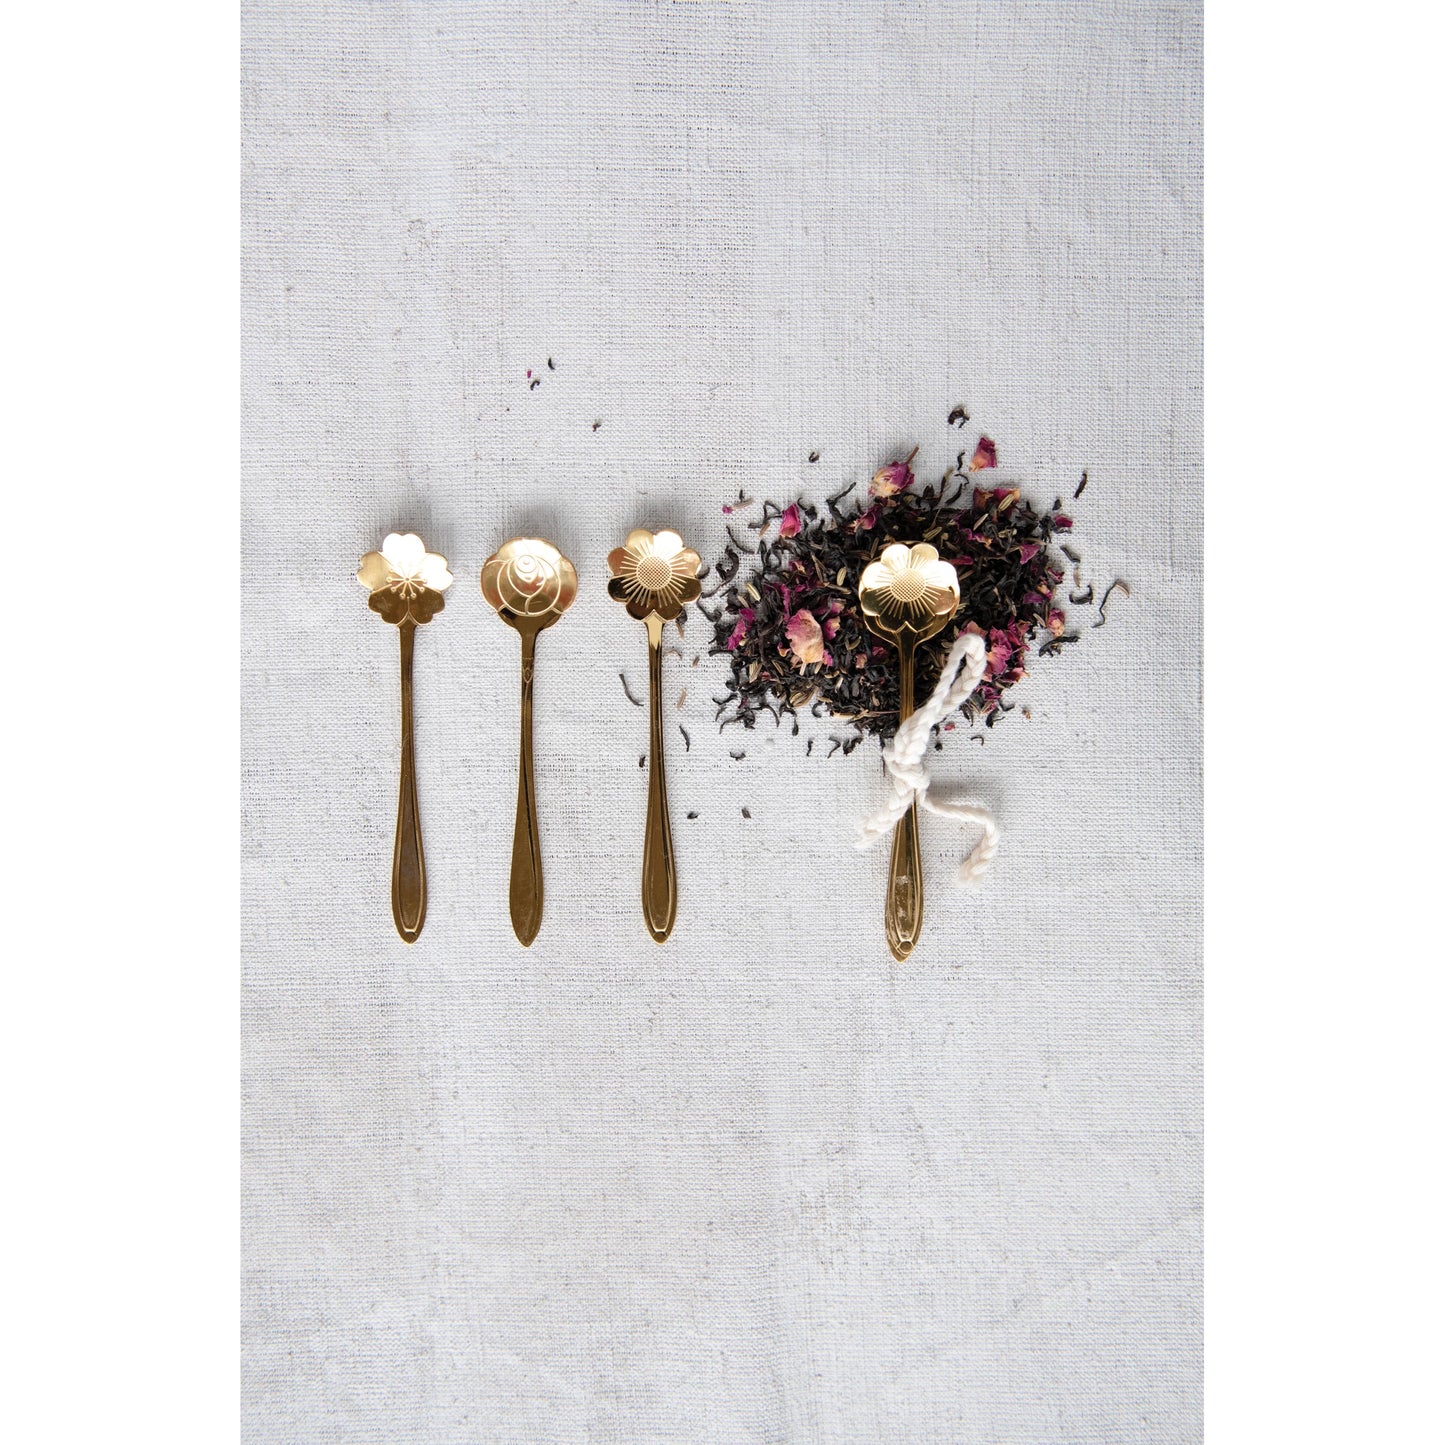 Stainless Steel Flower Shaped Spoons Set of 3